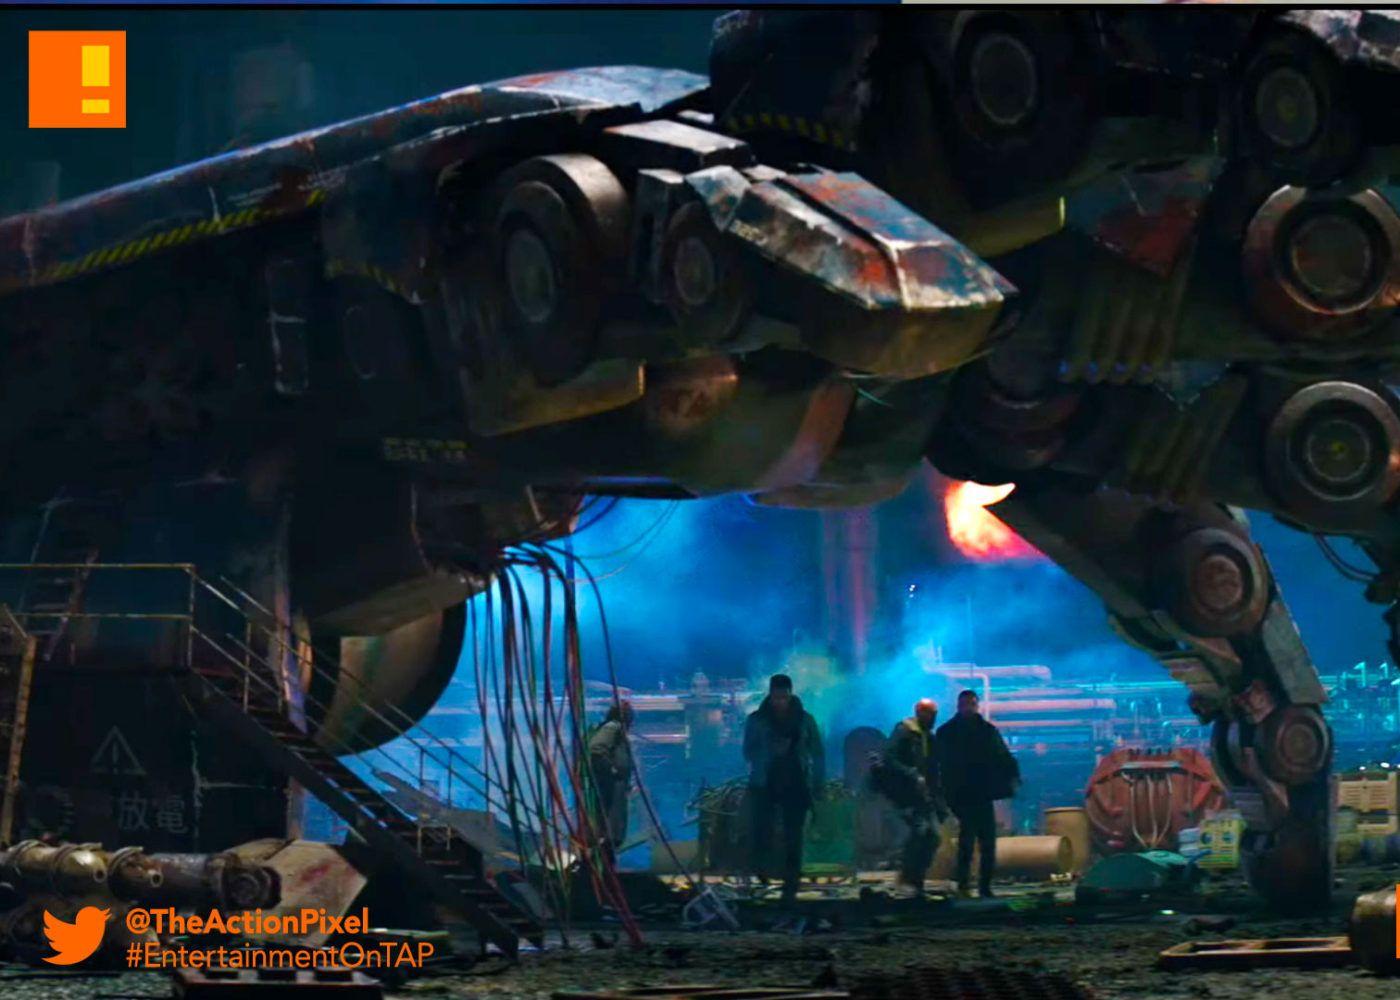 Pacific Rim Uprising” packs a punch in new footage from Tokyo